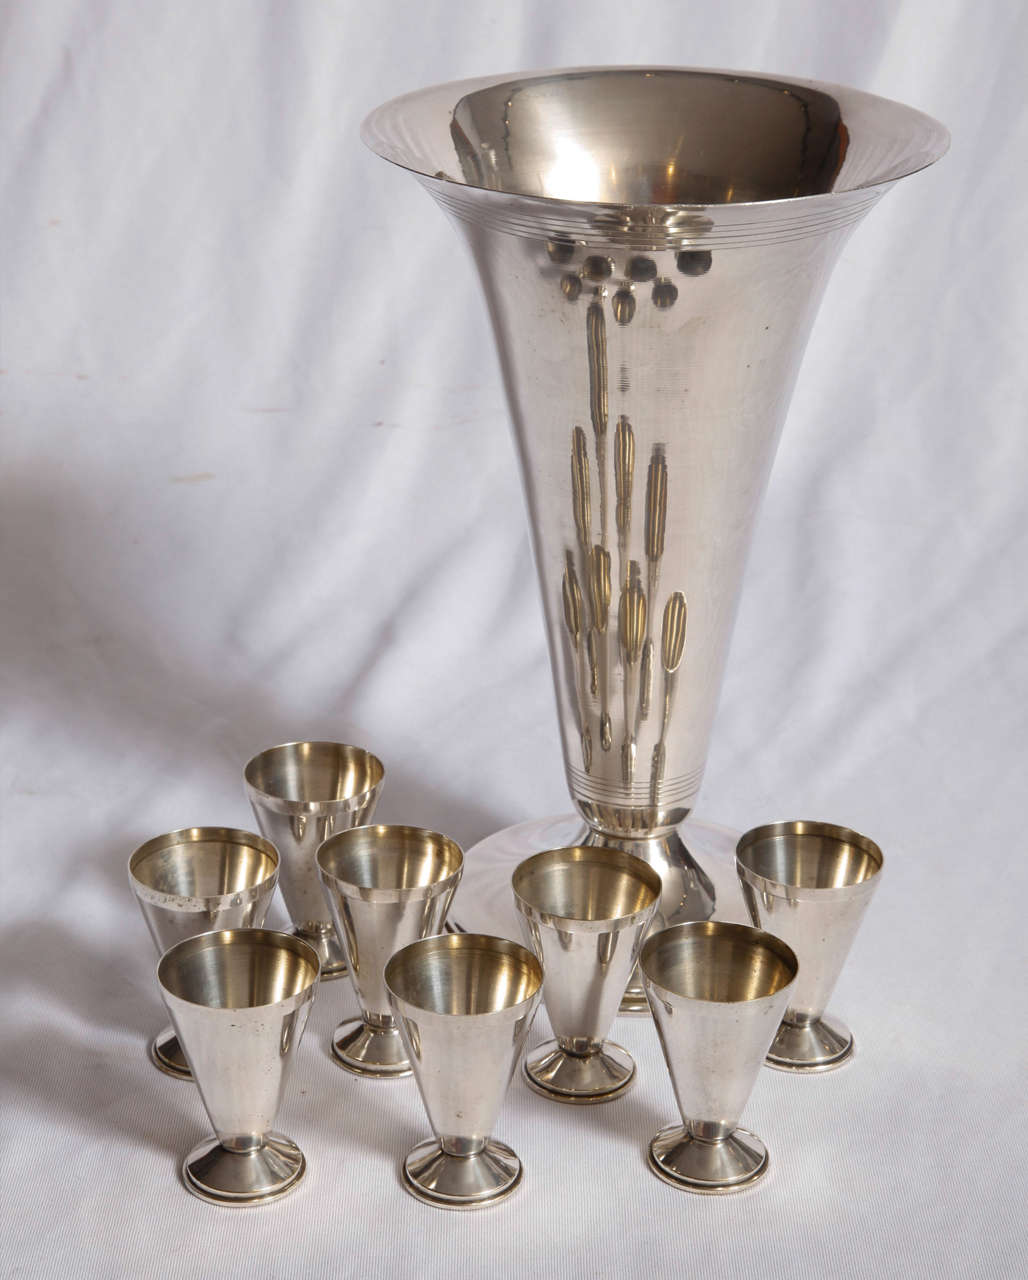 A set of eight silver plated cups and their bottle holder.